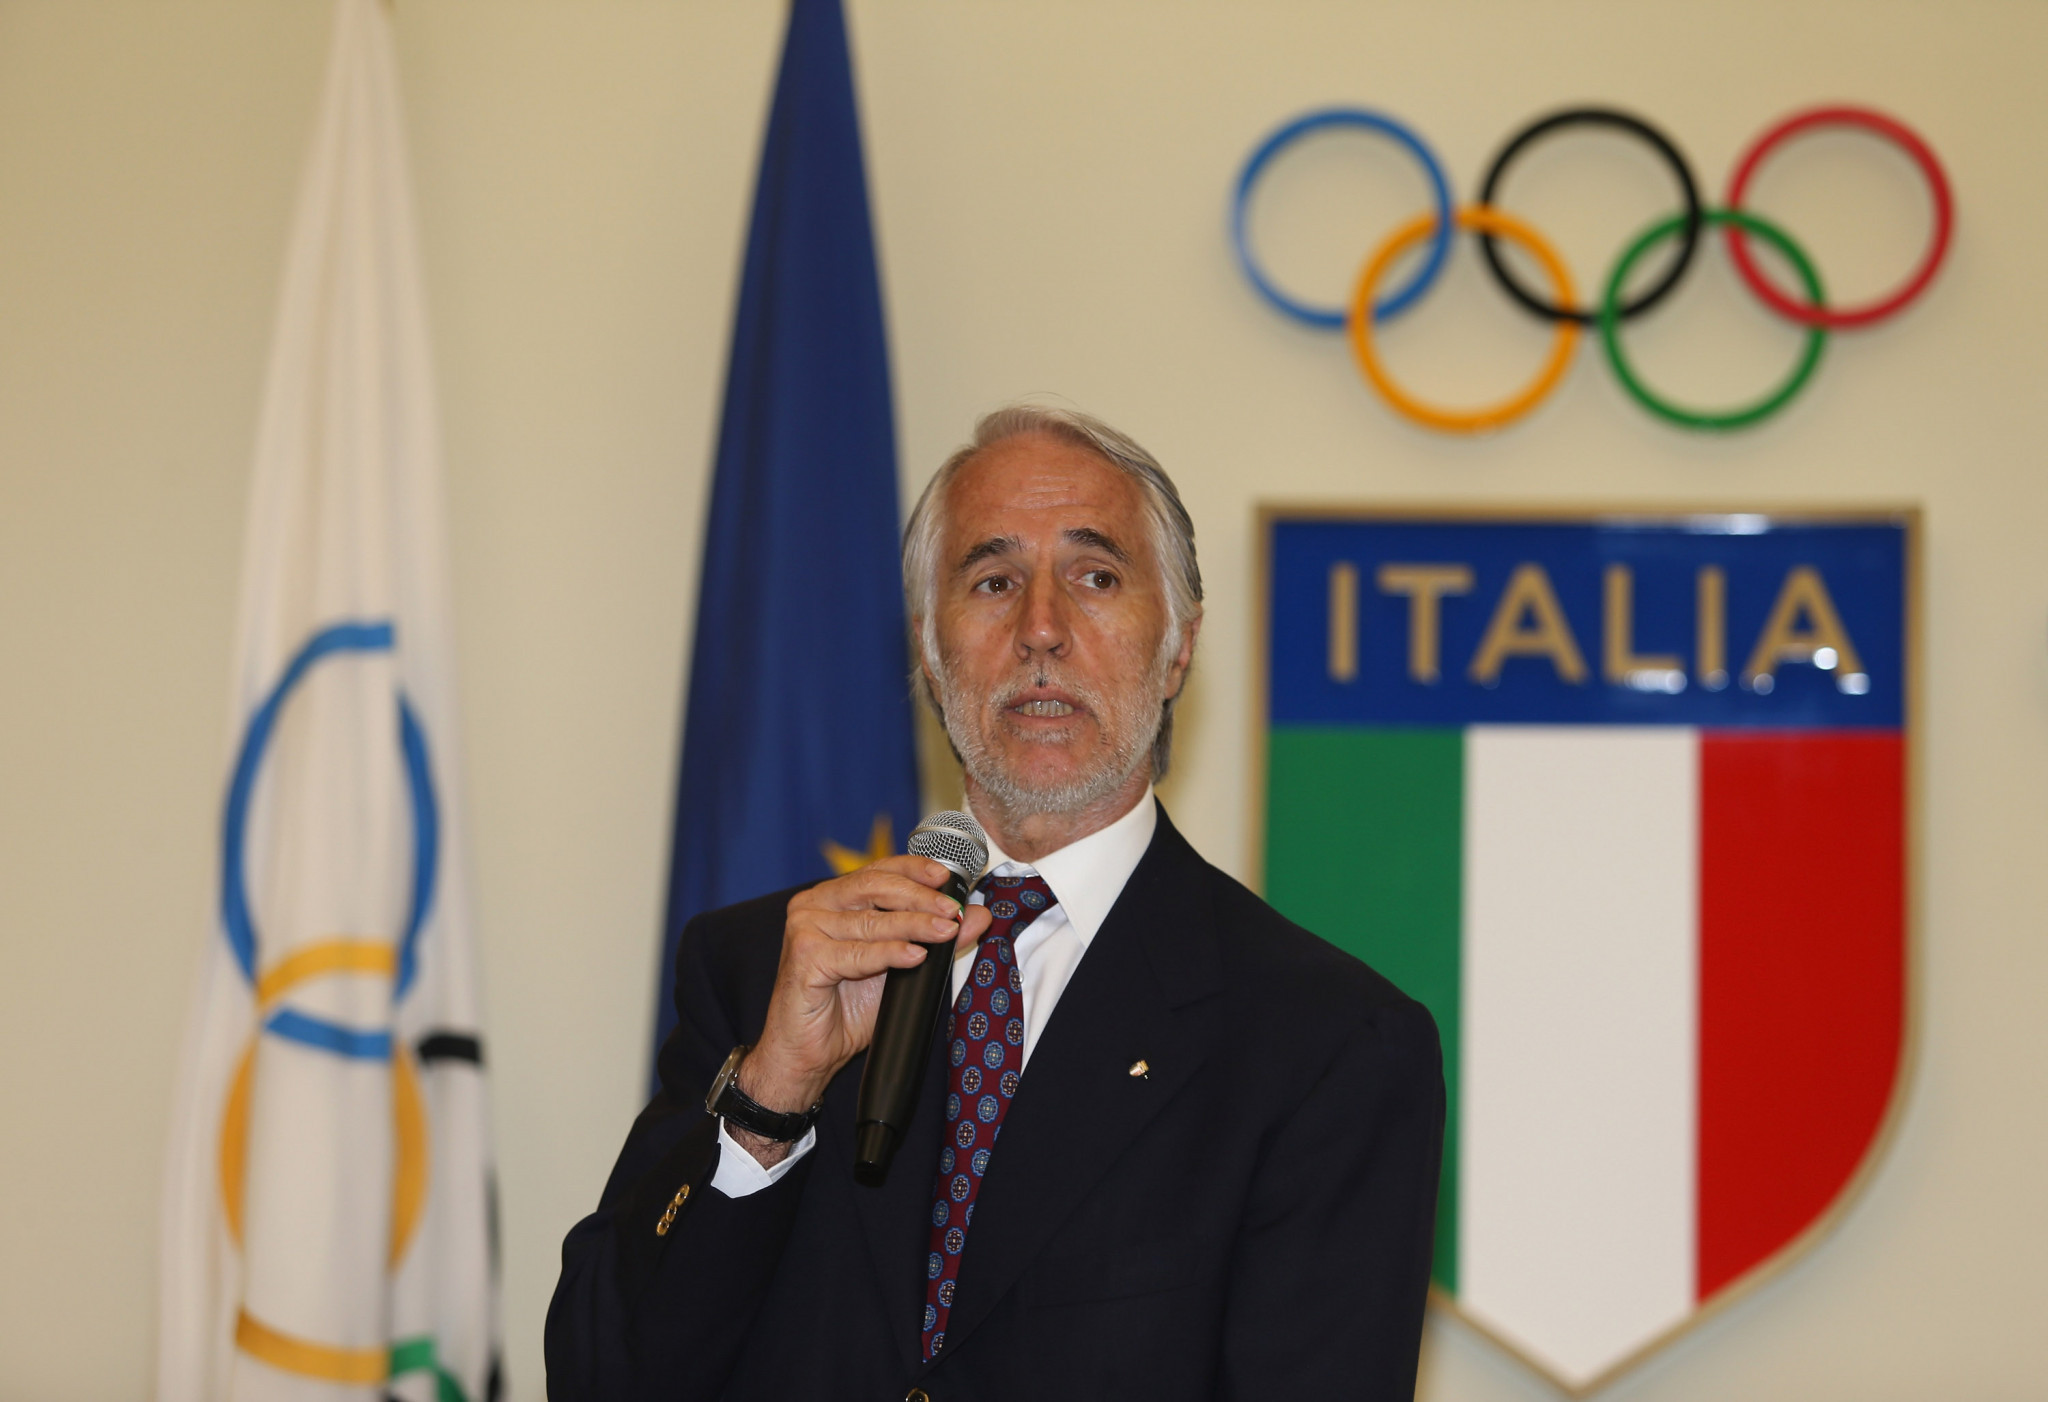 Giovanni Malagò had previously said an Italian Government was needed to help the 2026 Winter Olympic bid ©Getty Images 